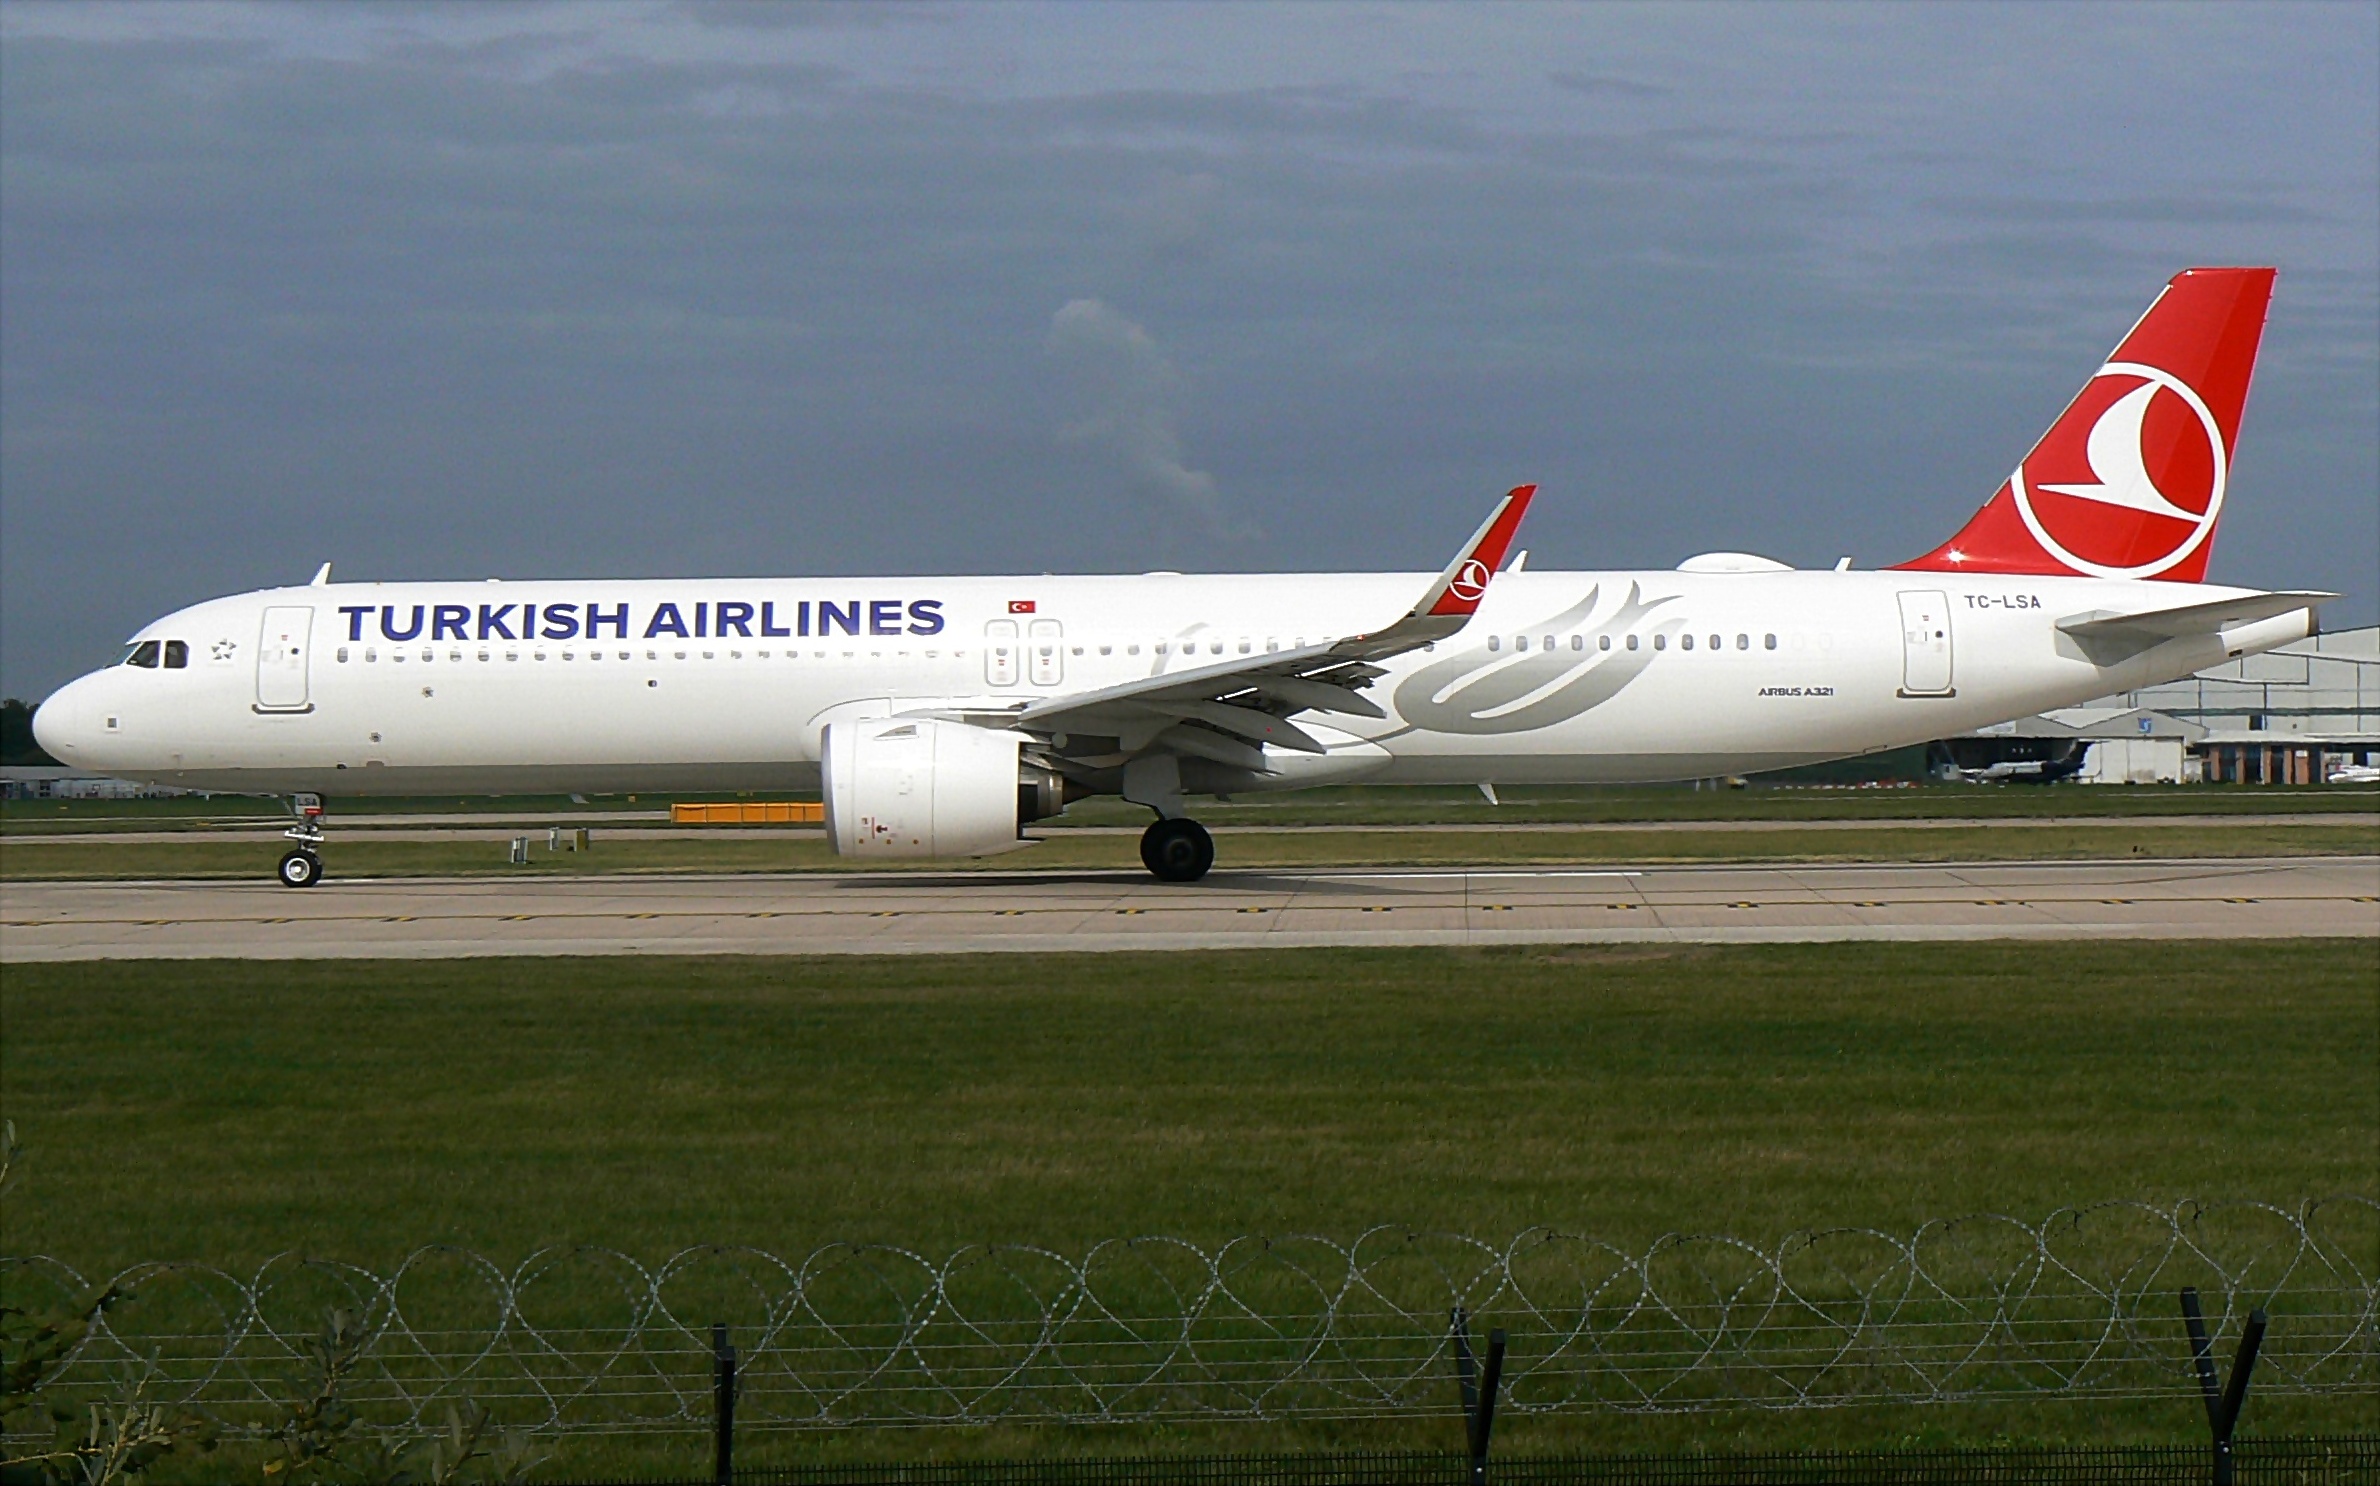 Туркиш эйрлайнс отзывы. Turkish Airlines a321neo. Airbus a321 Turkish Airlines. TC-gre a321. Airbus a321 Туркиш Эйрлайнс.